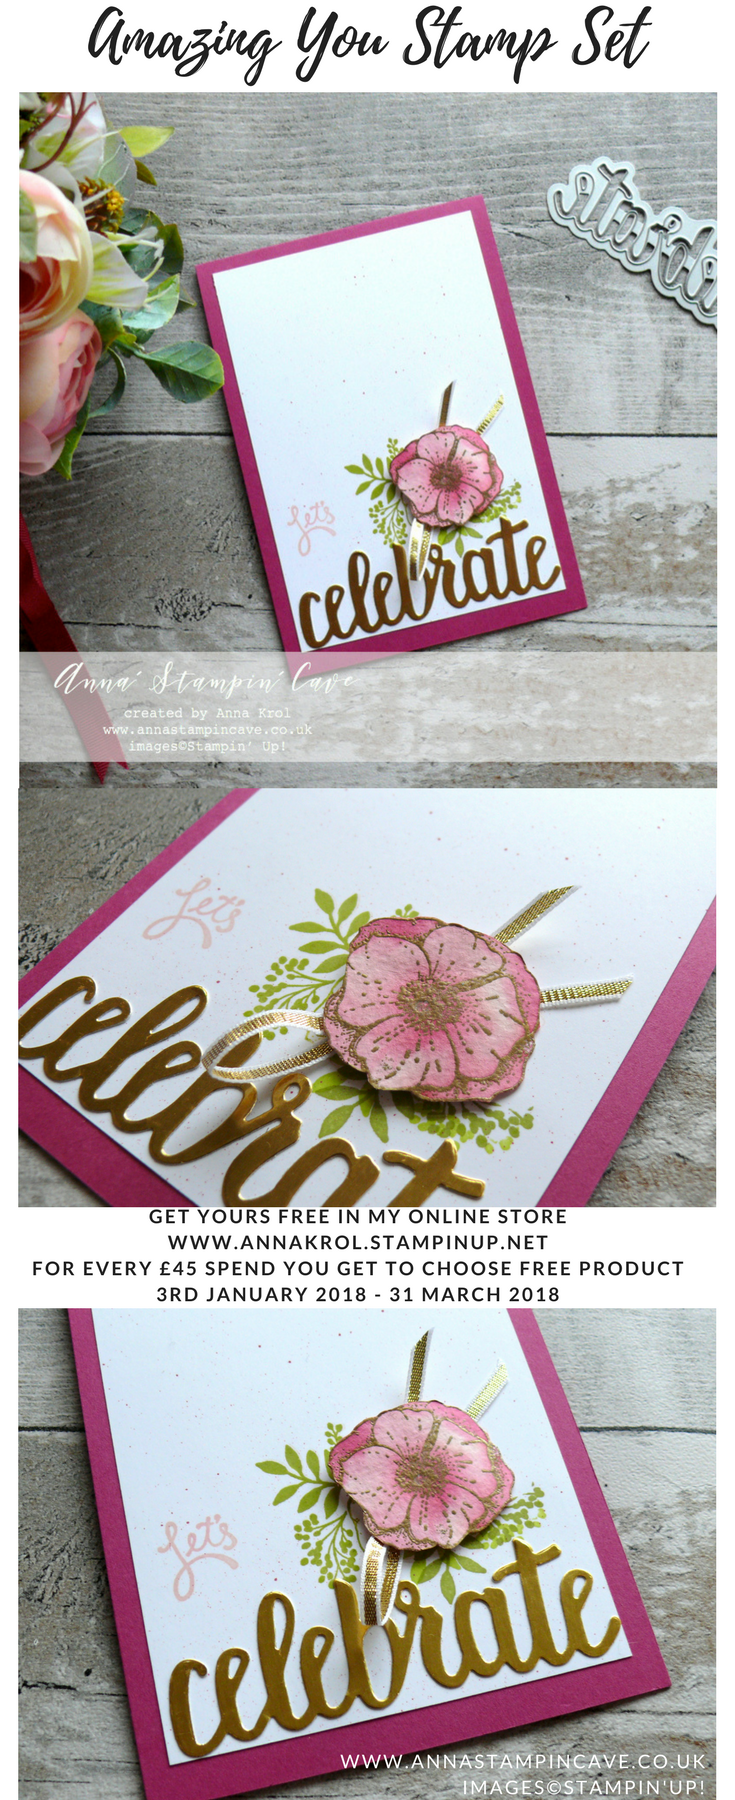 Anna' Stampin' Cave - Let's Celebrate Clean & Simple Card using Stampin' Up! Amazing You Stamp Set - Powder Pink, Berry Burst & Gold Foil